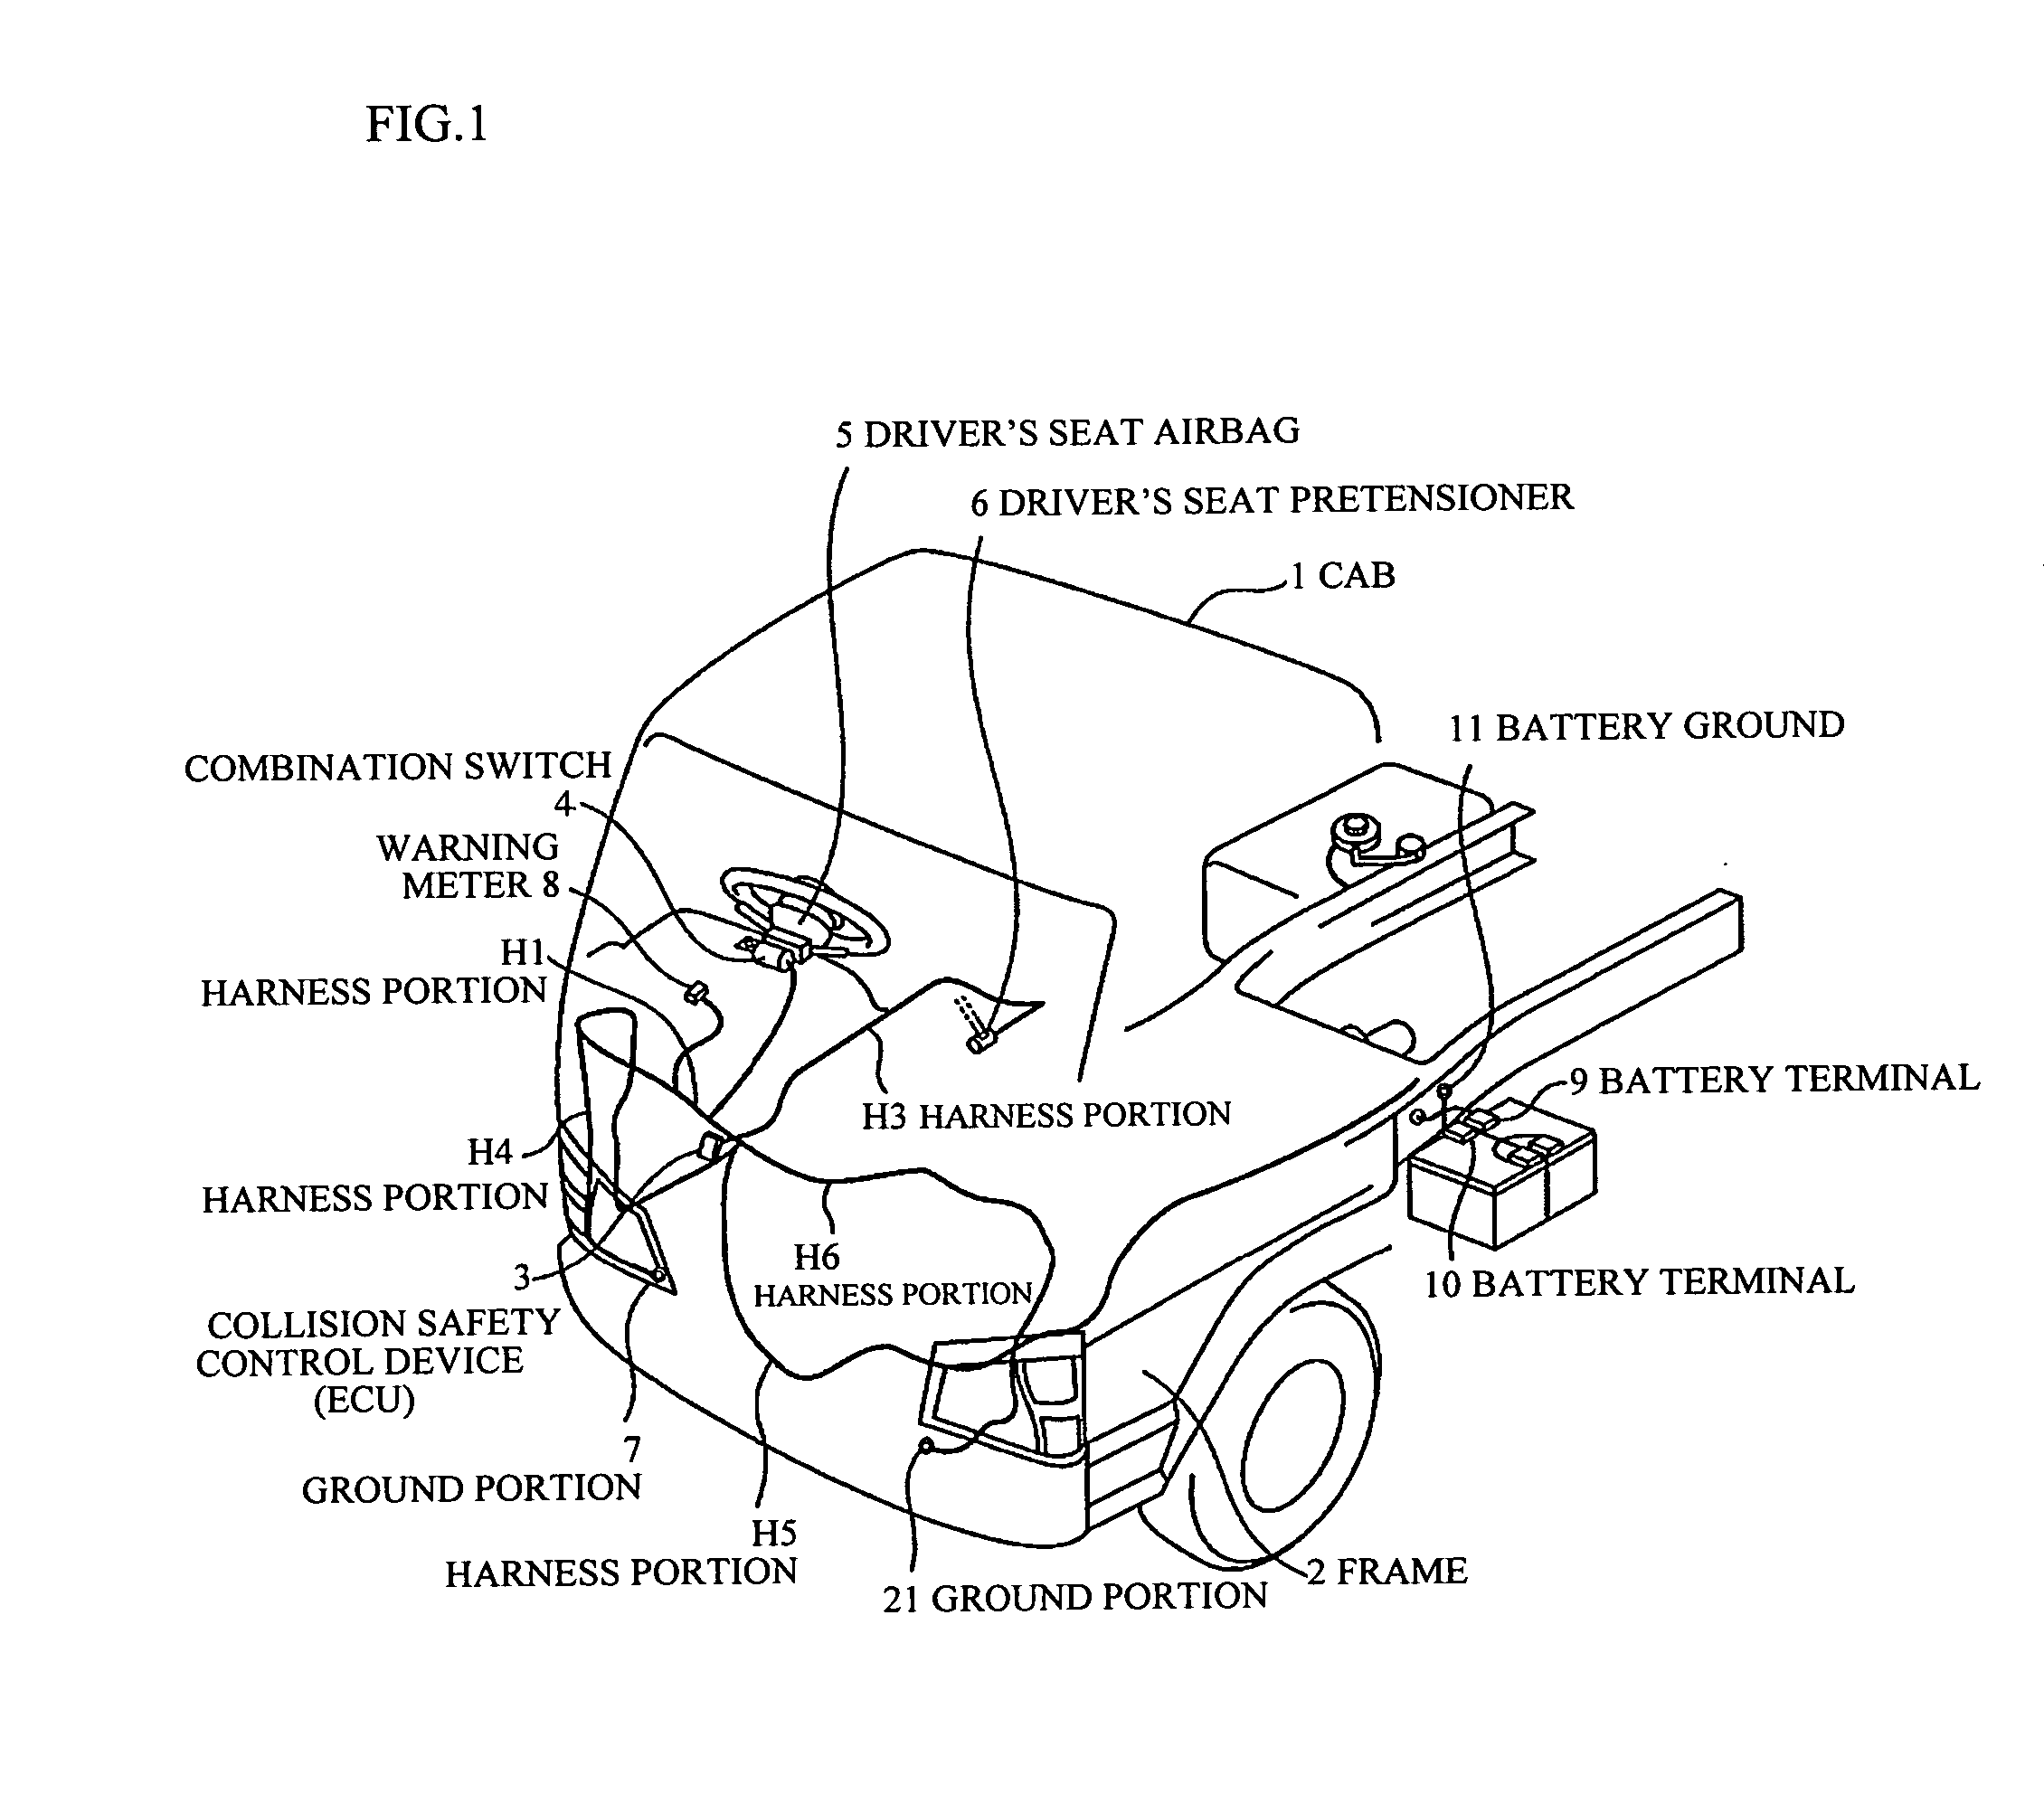 Collision safety control device